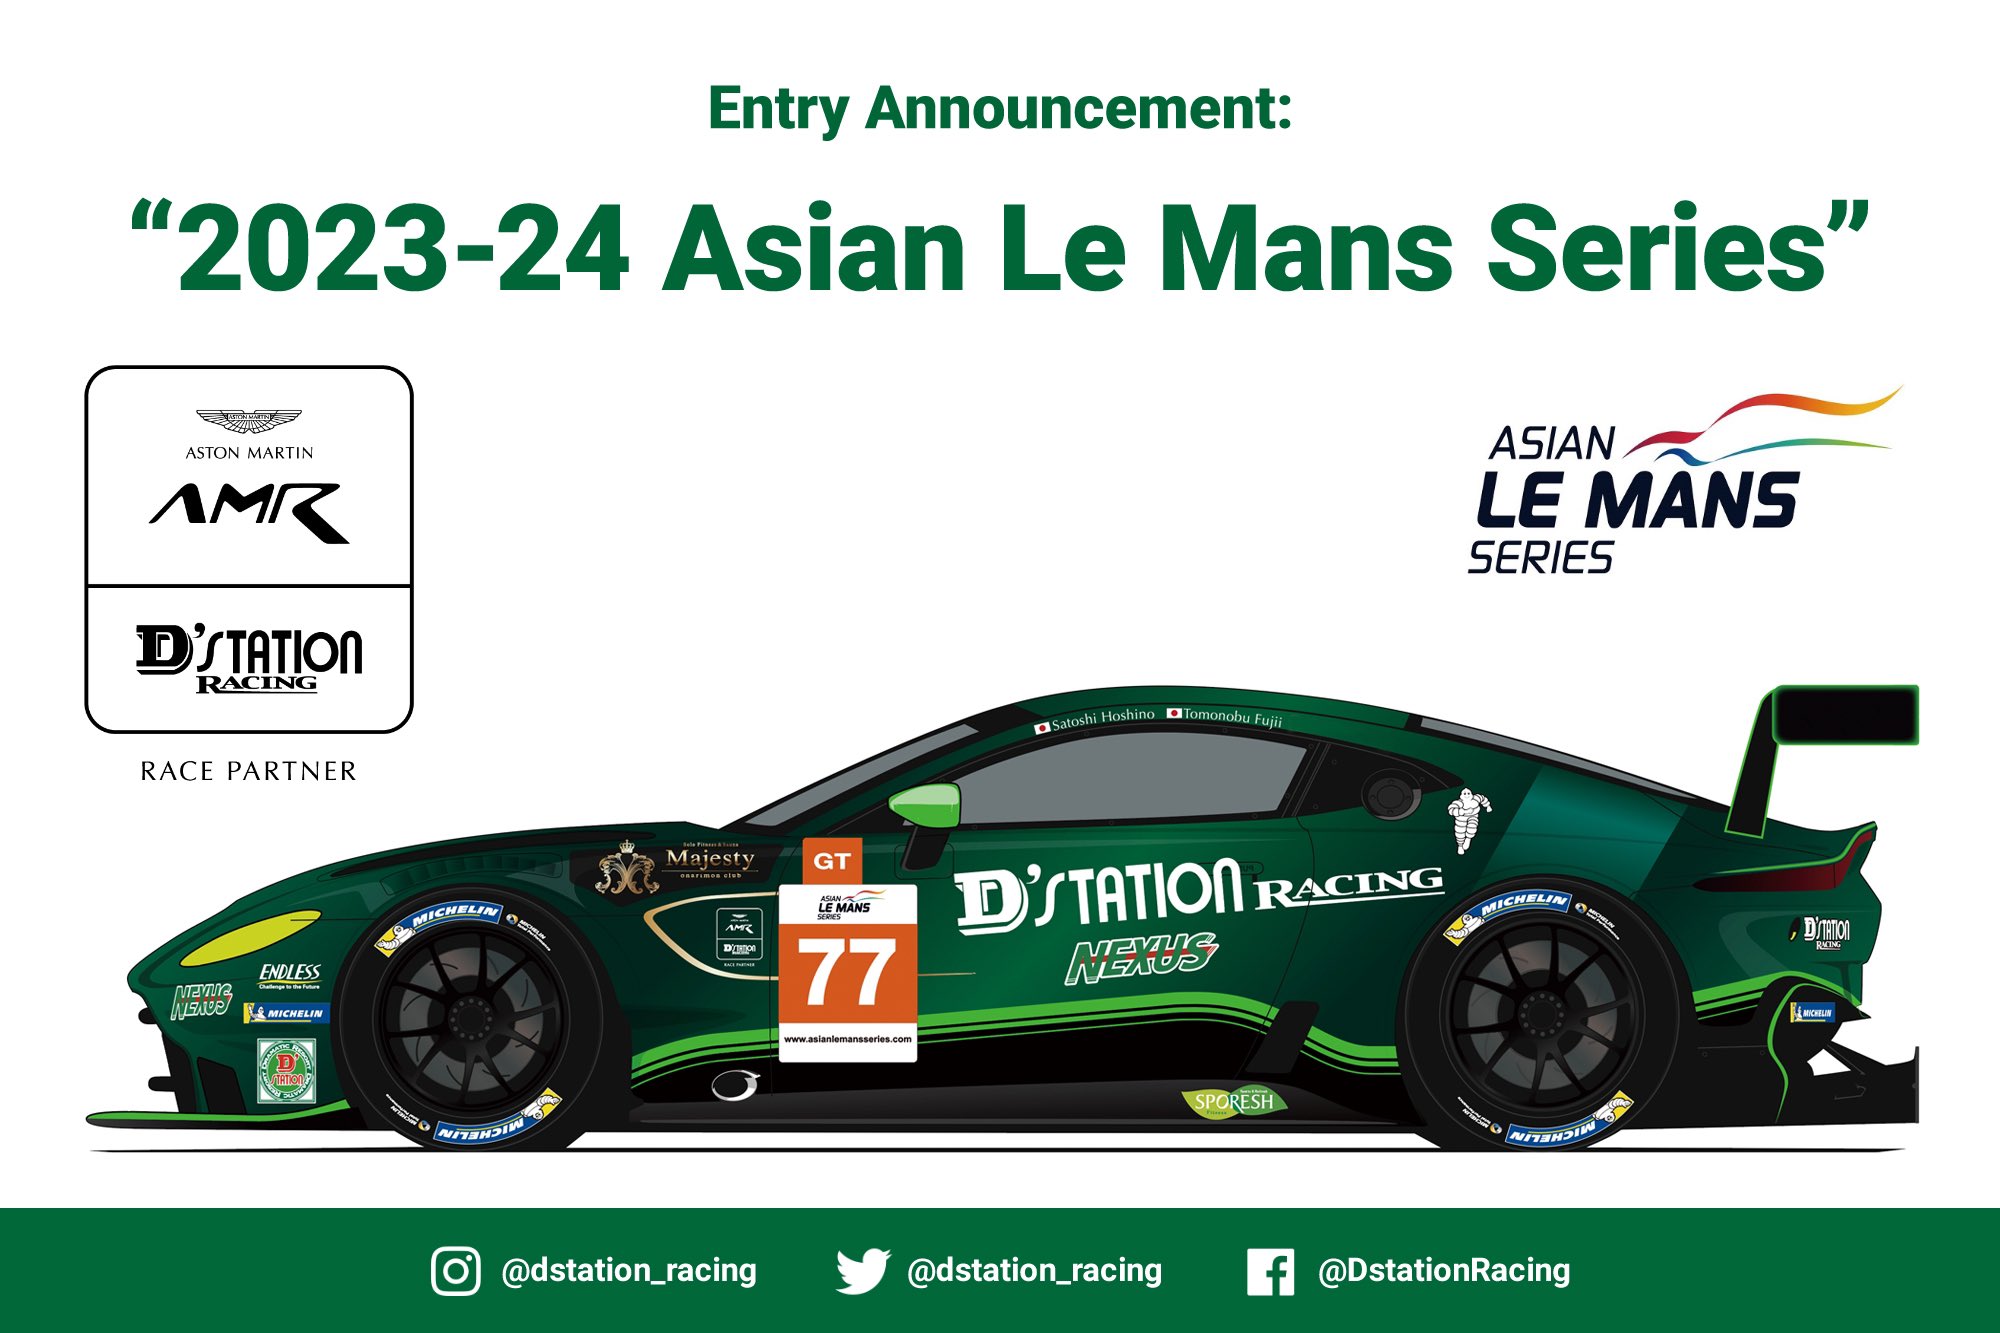 D’station Racing will be competing in the 20232024 Asian Le Mans